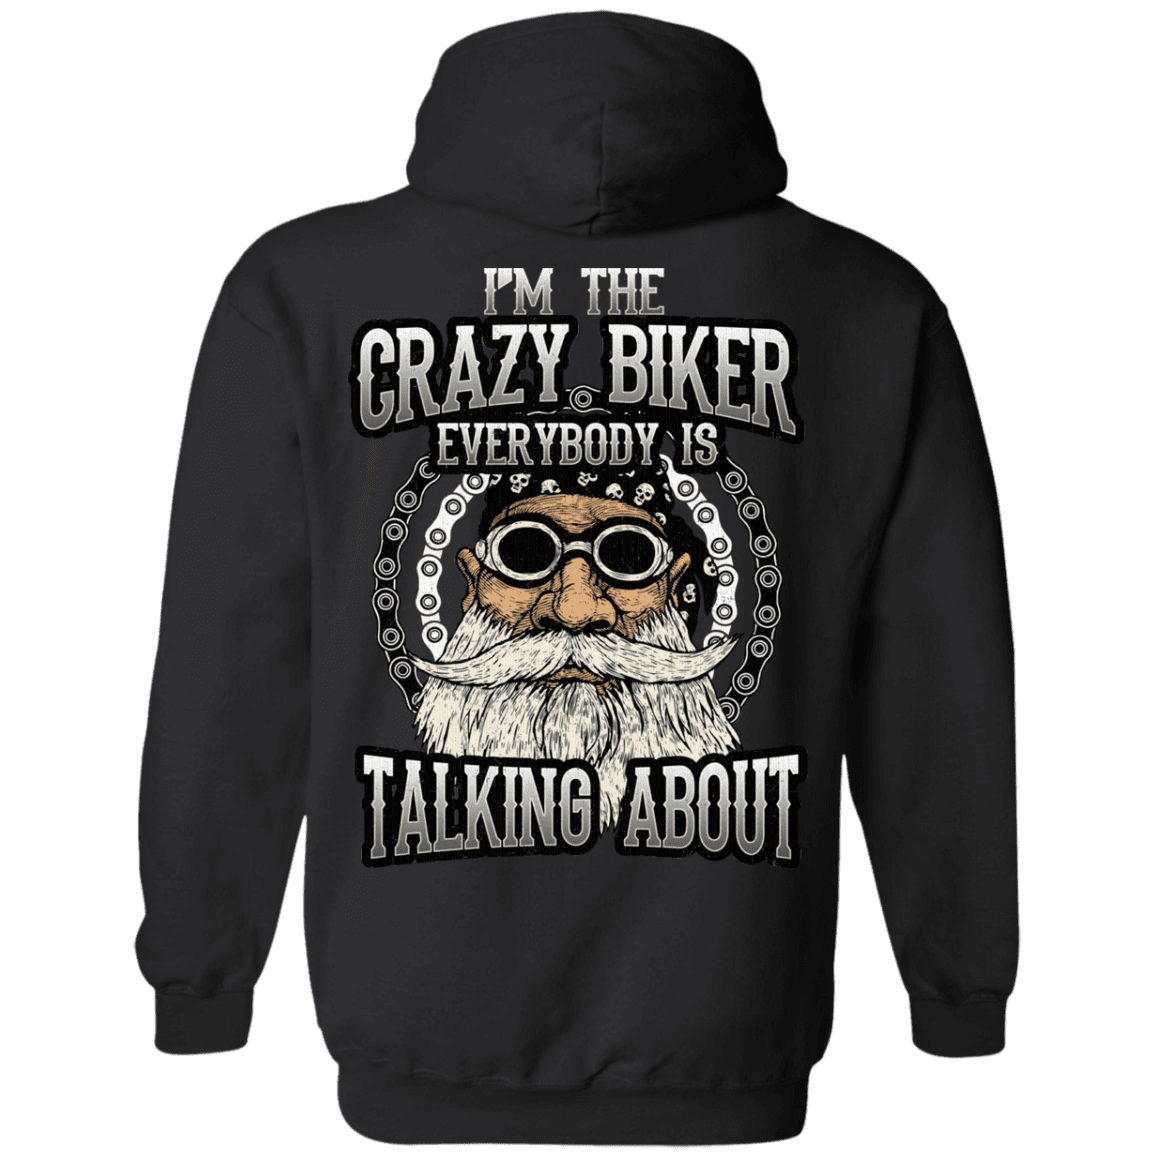 I'm The Crazy Biker Everybody Is Talking About Hoodie, Cotton/Polyester, Black